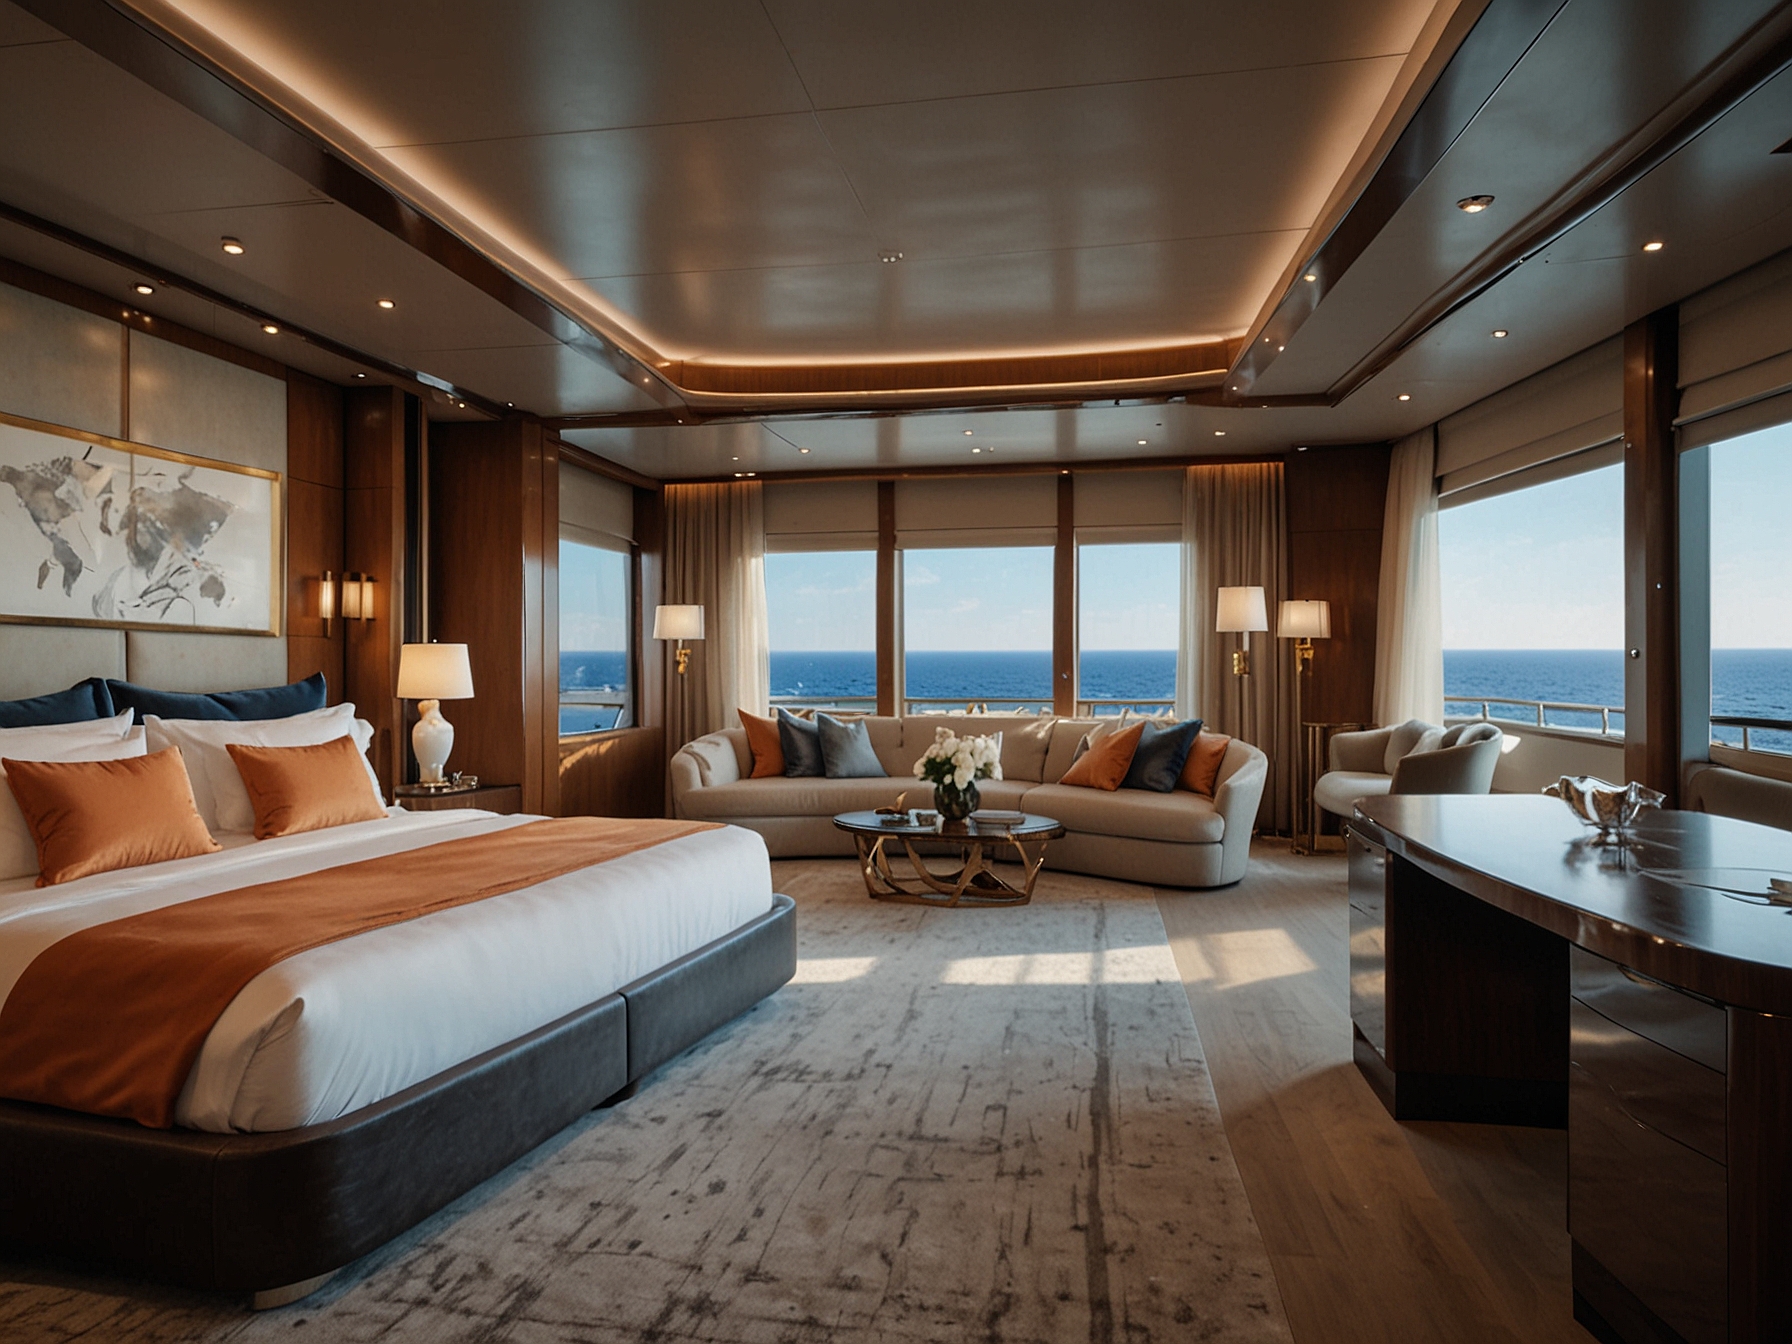 The opulent master suite on the Feadship superyacht includes a king-sized bed, en-suite bathroom, and large windows offering breathtaking sea views, epitomizing luxury and comfort.